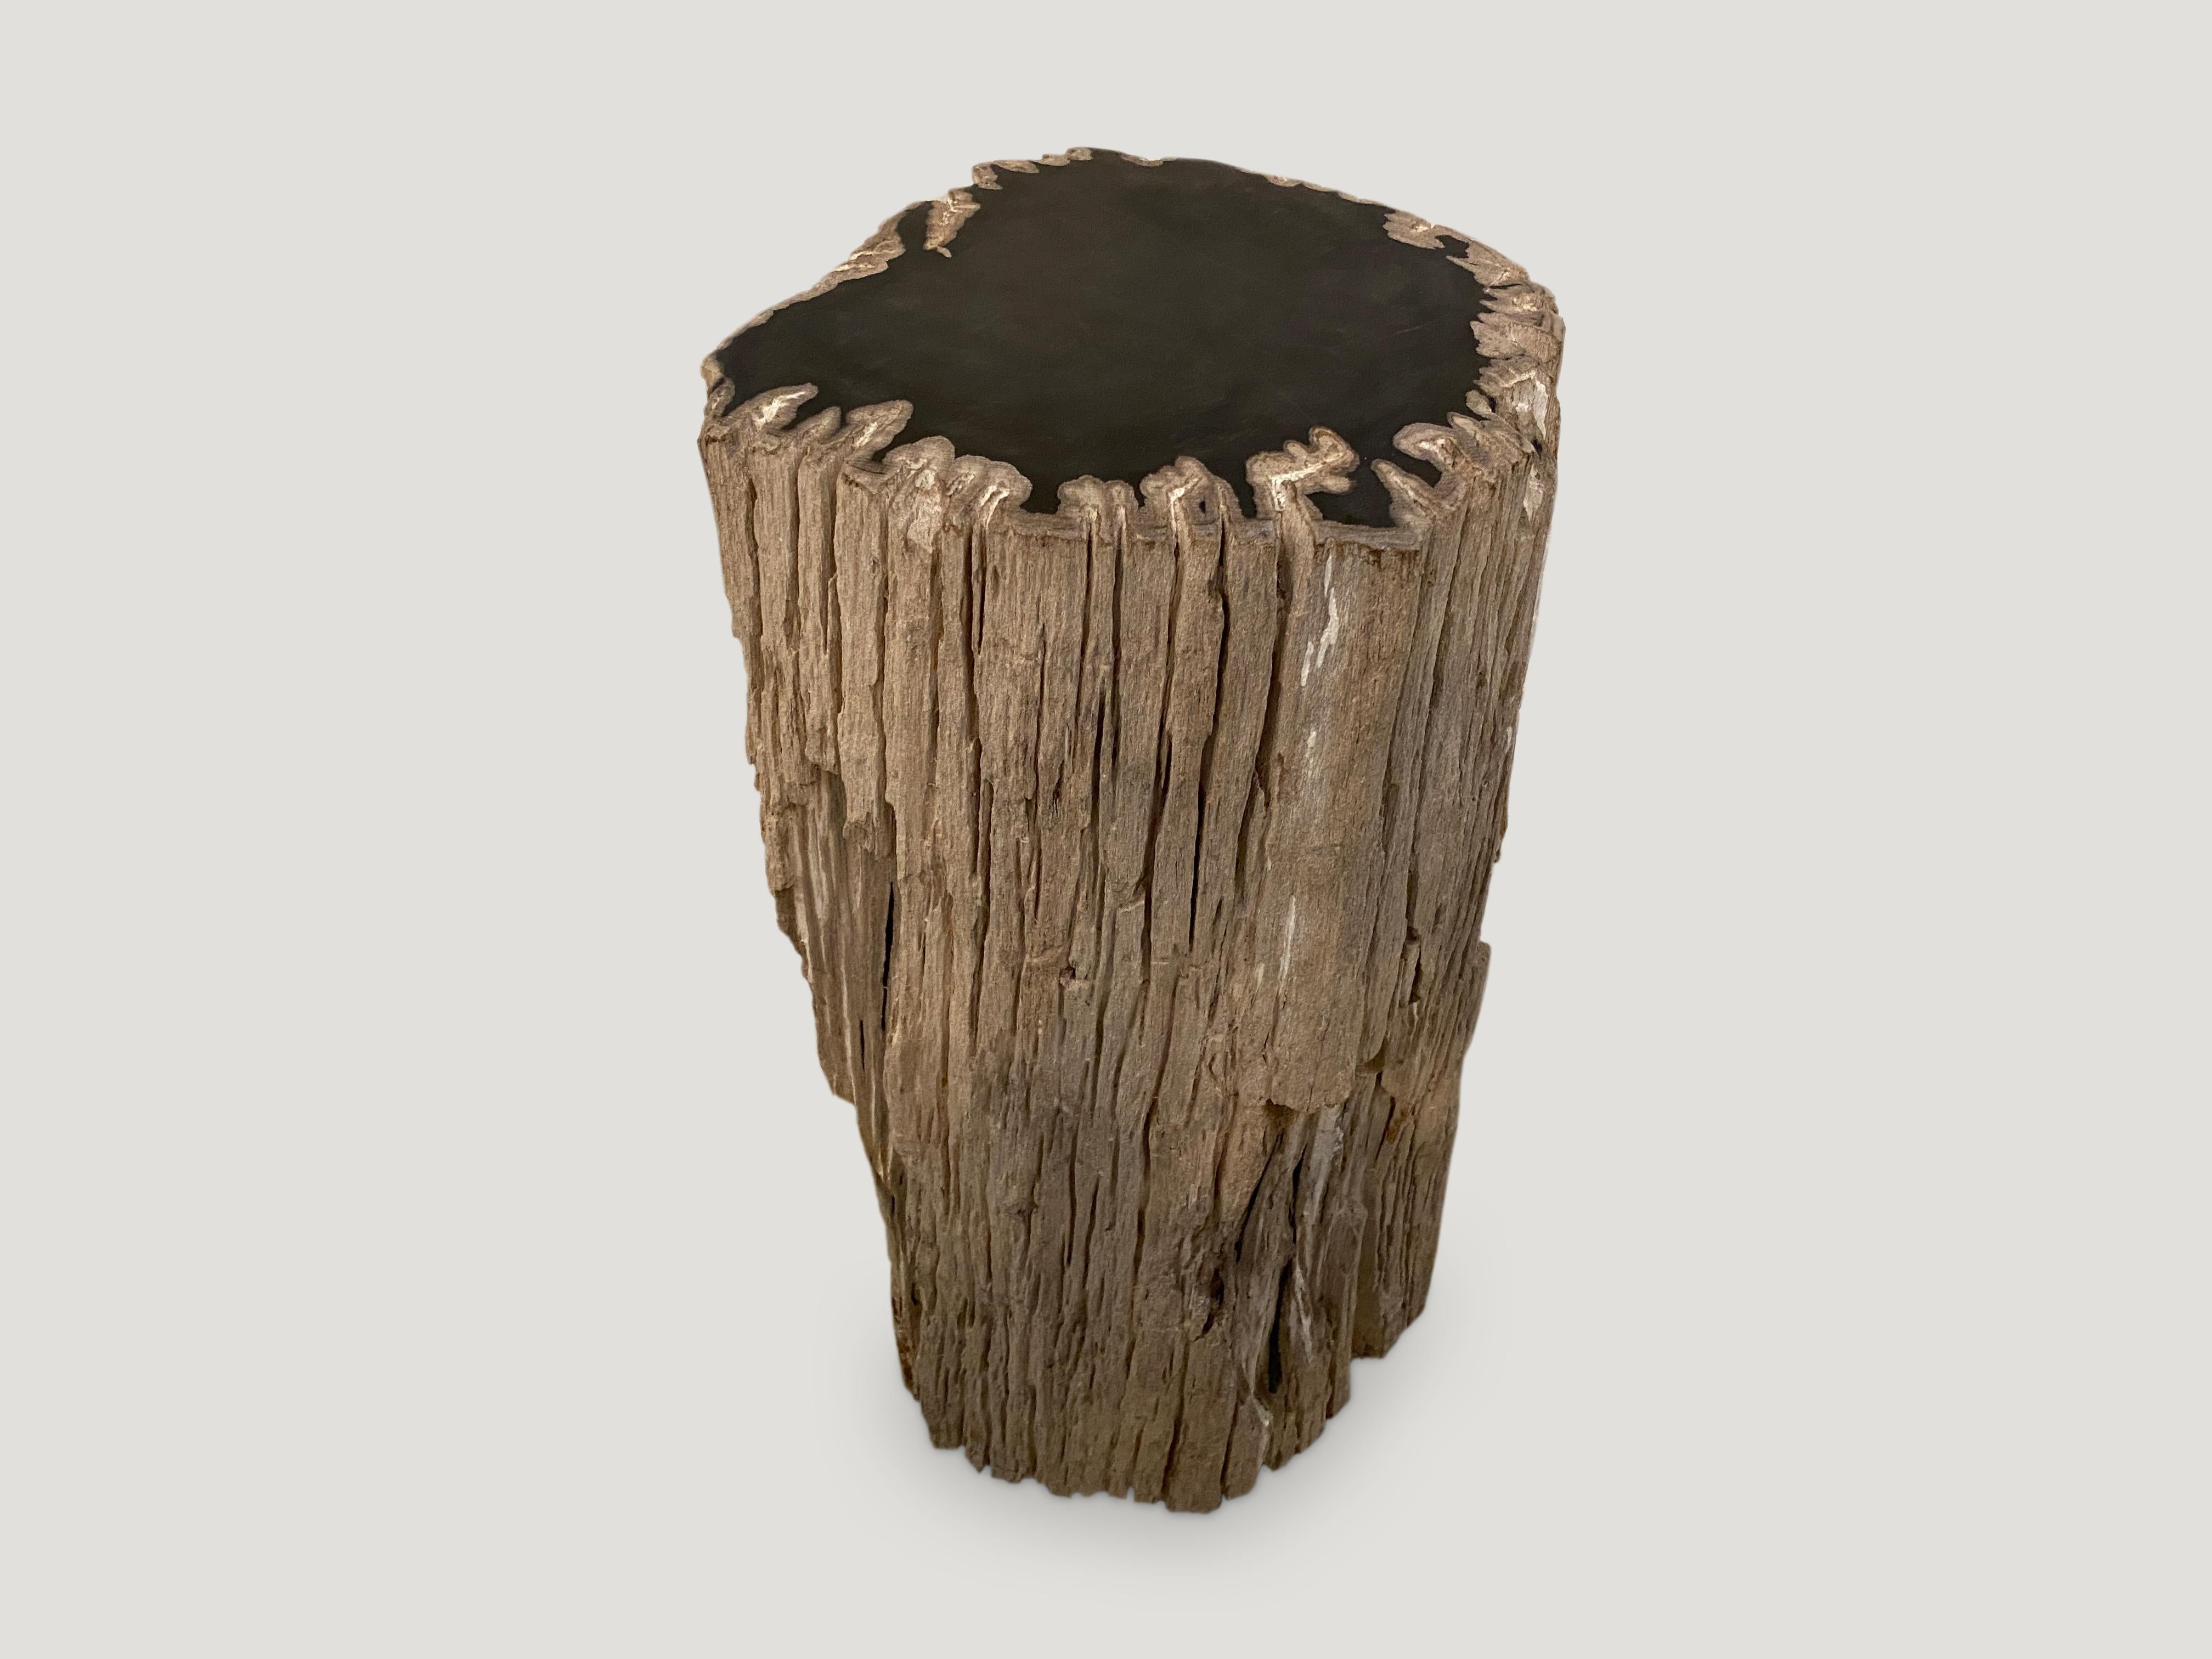 We have left the sides raw and polished the top of this petrified wood side table. 

As with a diamond, we polish the highest quality fossilized petrified wood, using our latest ground breaking technology, to reveal its natural beauty and